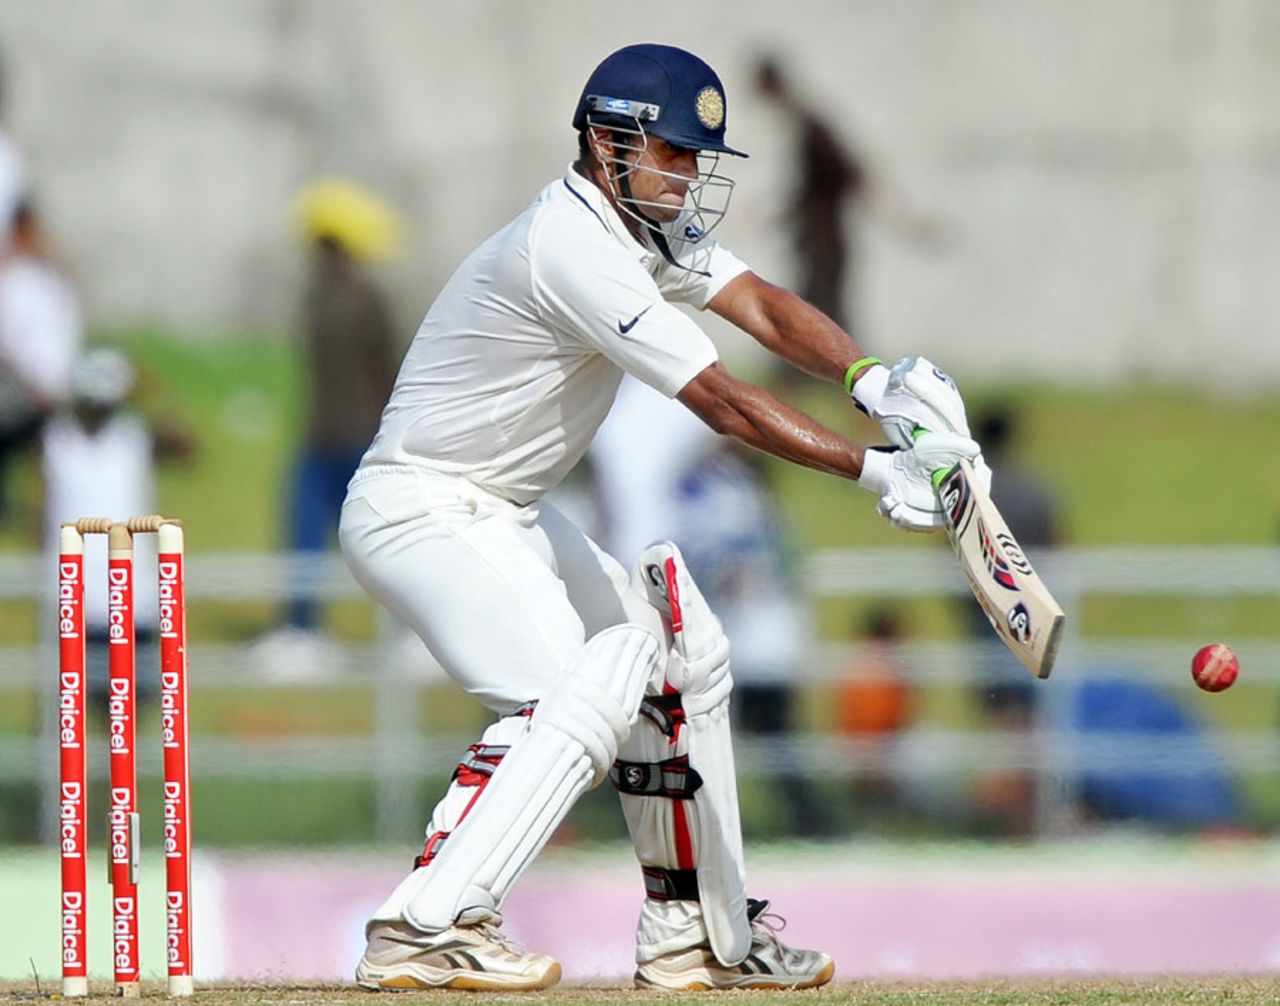 Rahul Dravid is all concentration as he plays the ball to the off side, West Indies v India, 3rd Test, Dominica, 5th day, July 10, 2011